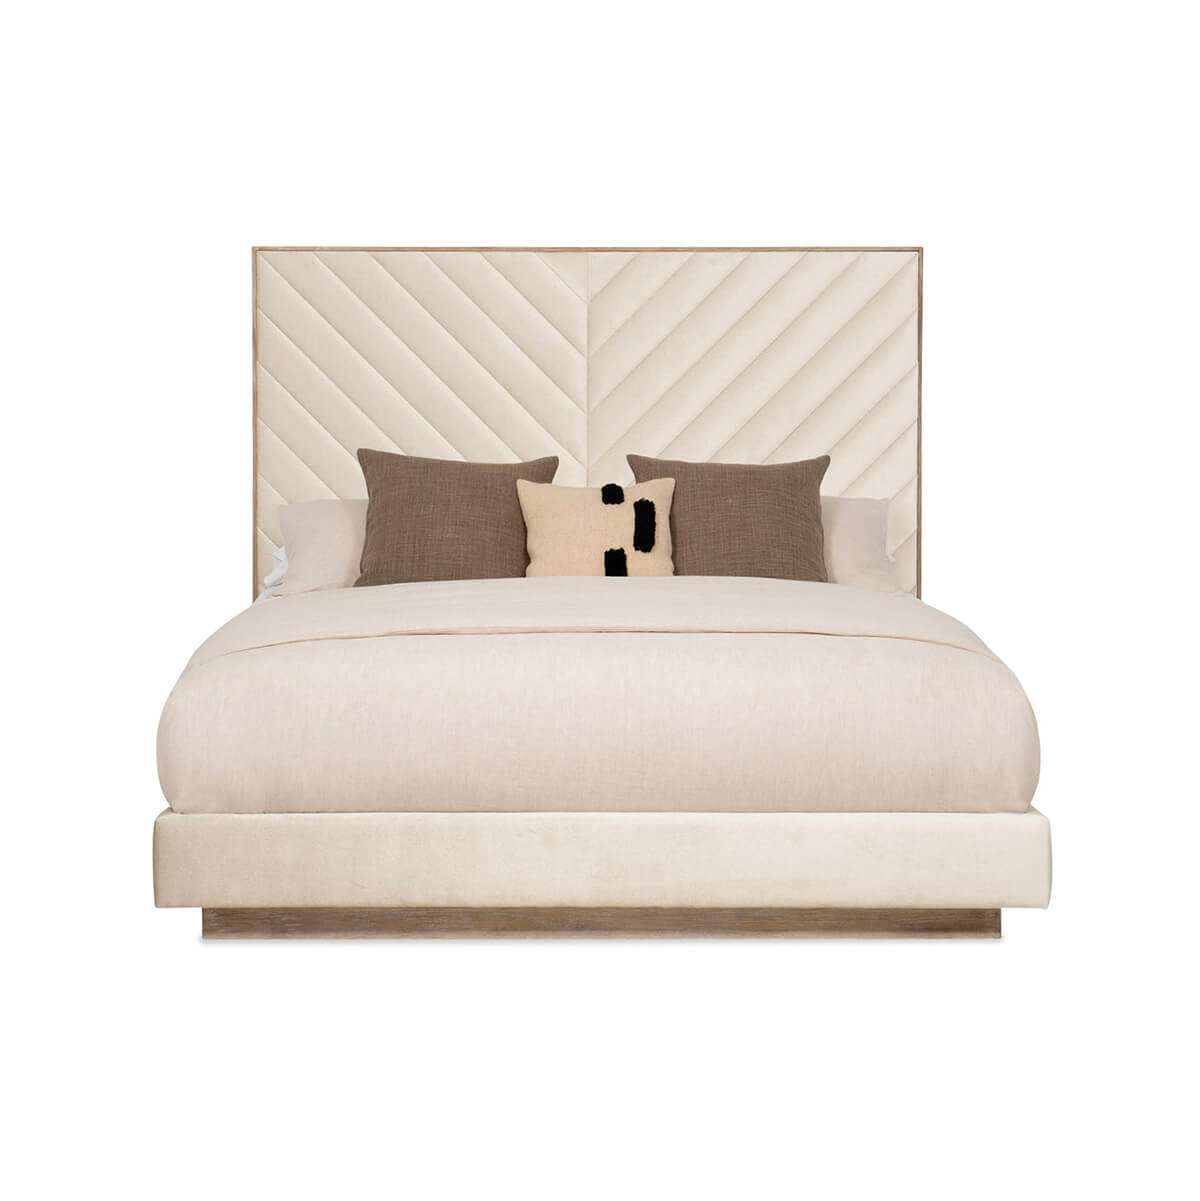 Chevron Tufted Upholstered Queen Bed - English Georgian America